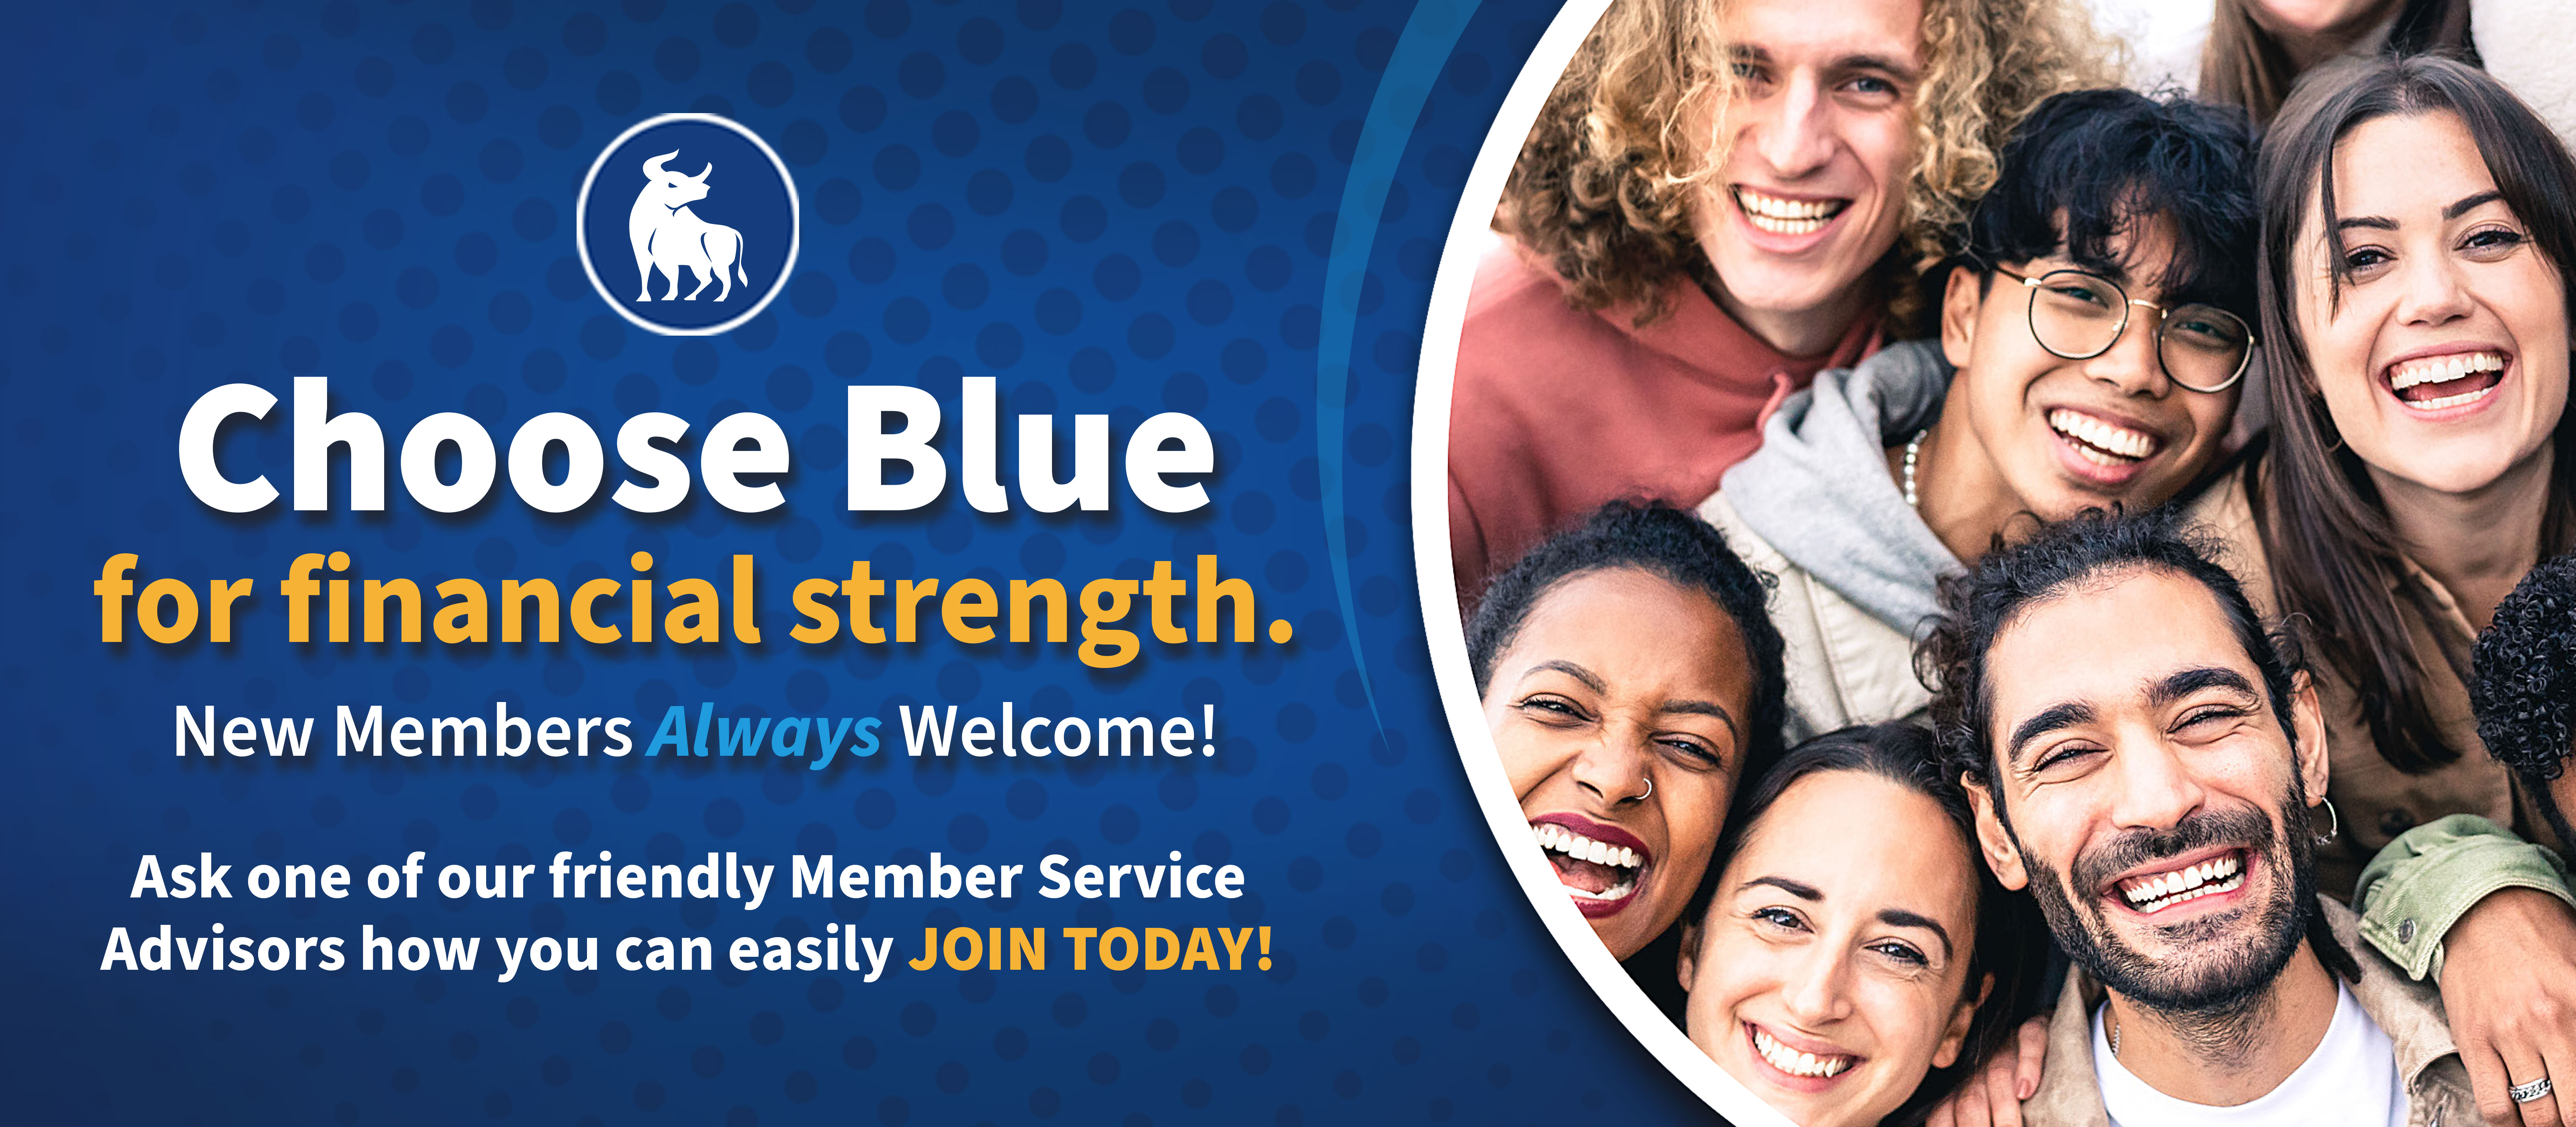 Choose Blue for financial strength. New Members are always welcome at BlueOx Credit Union.